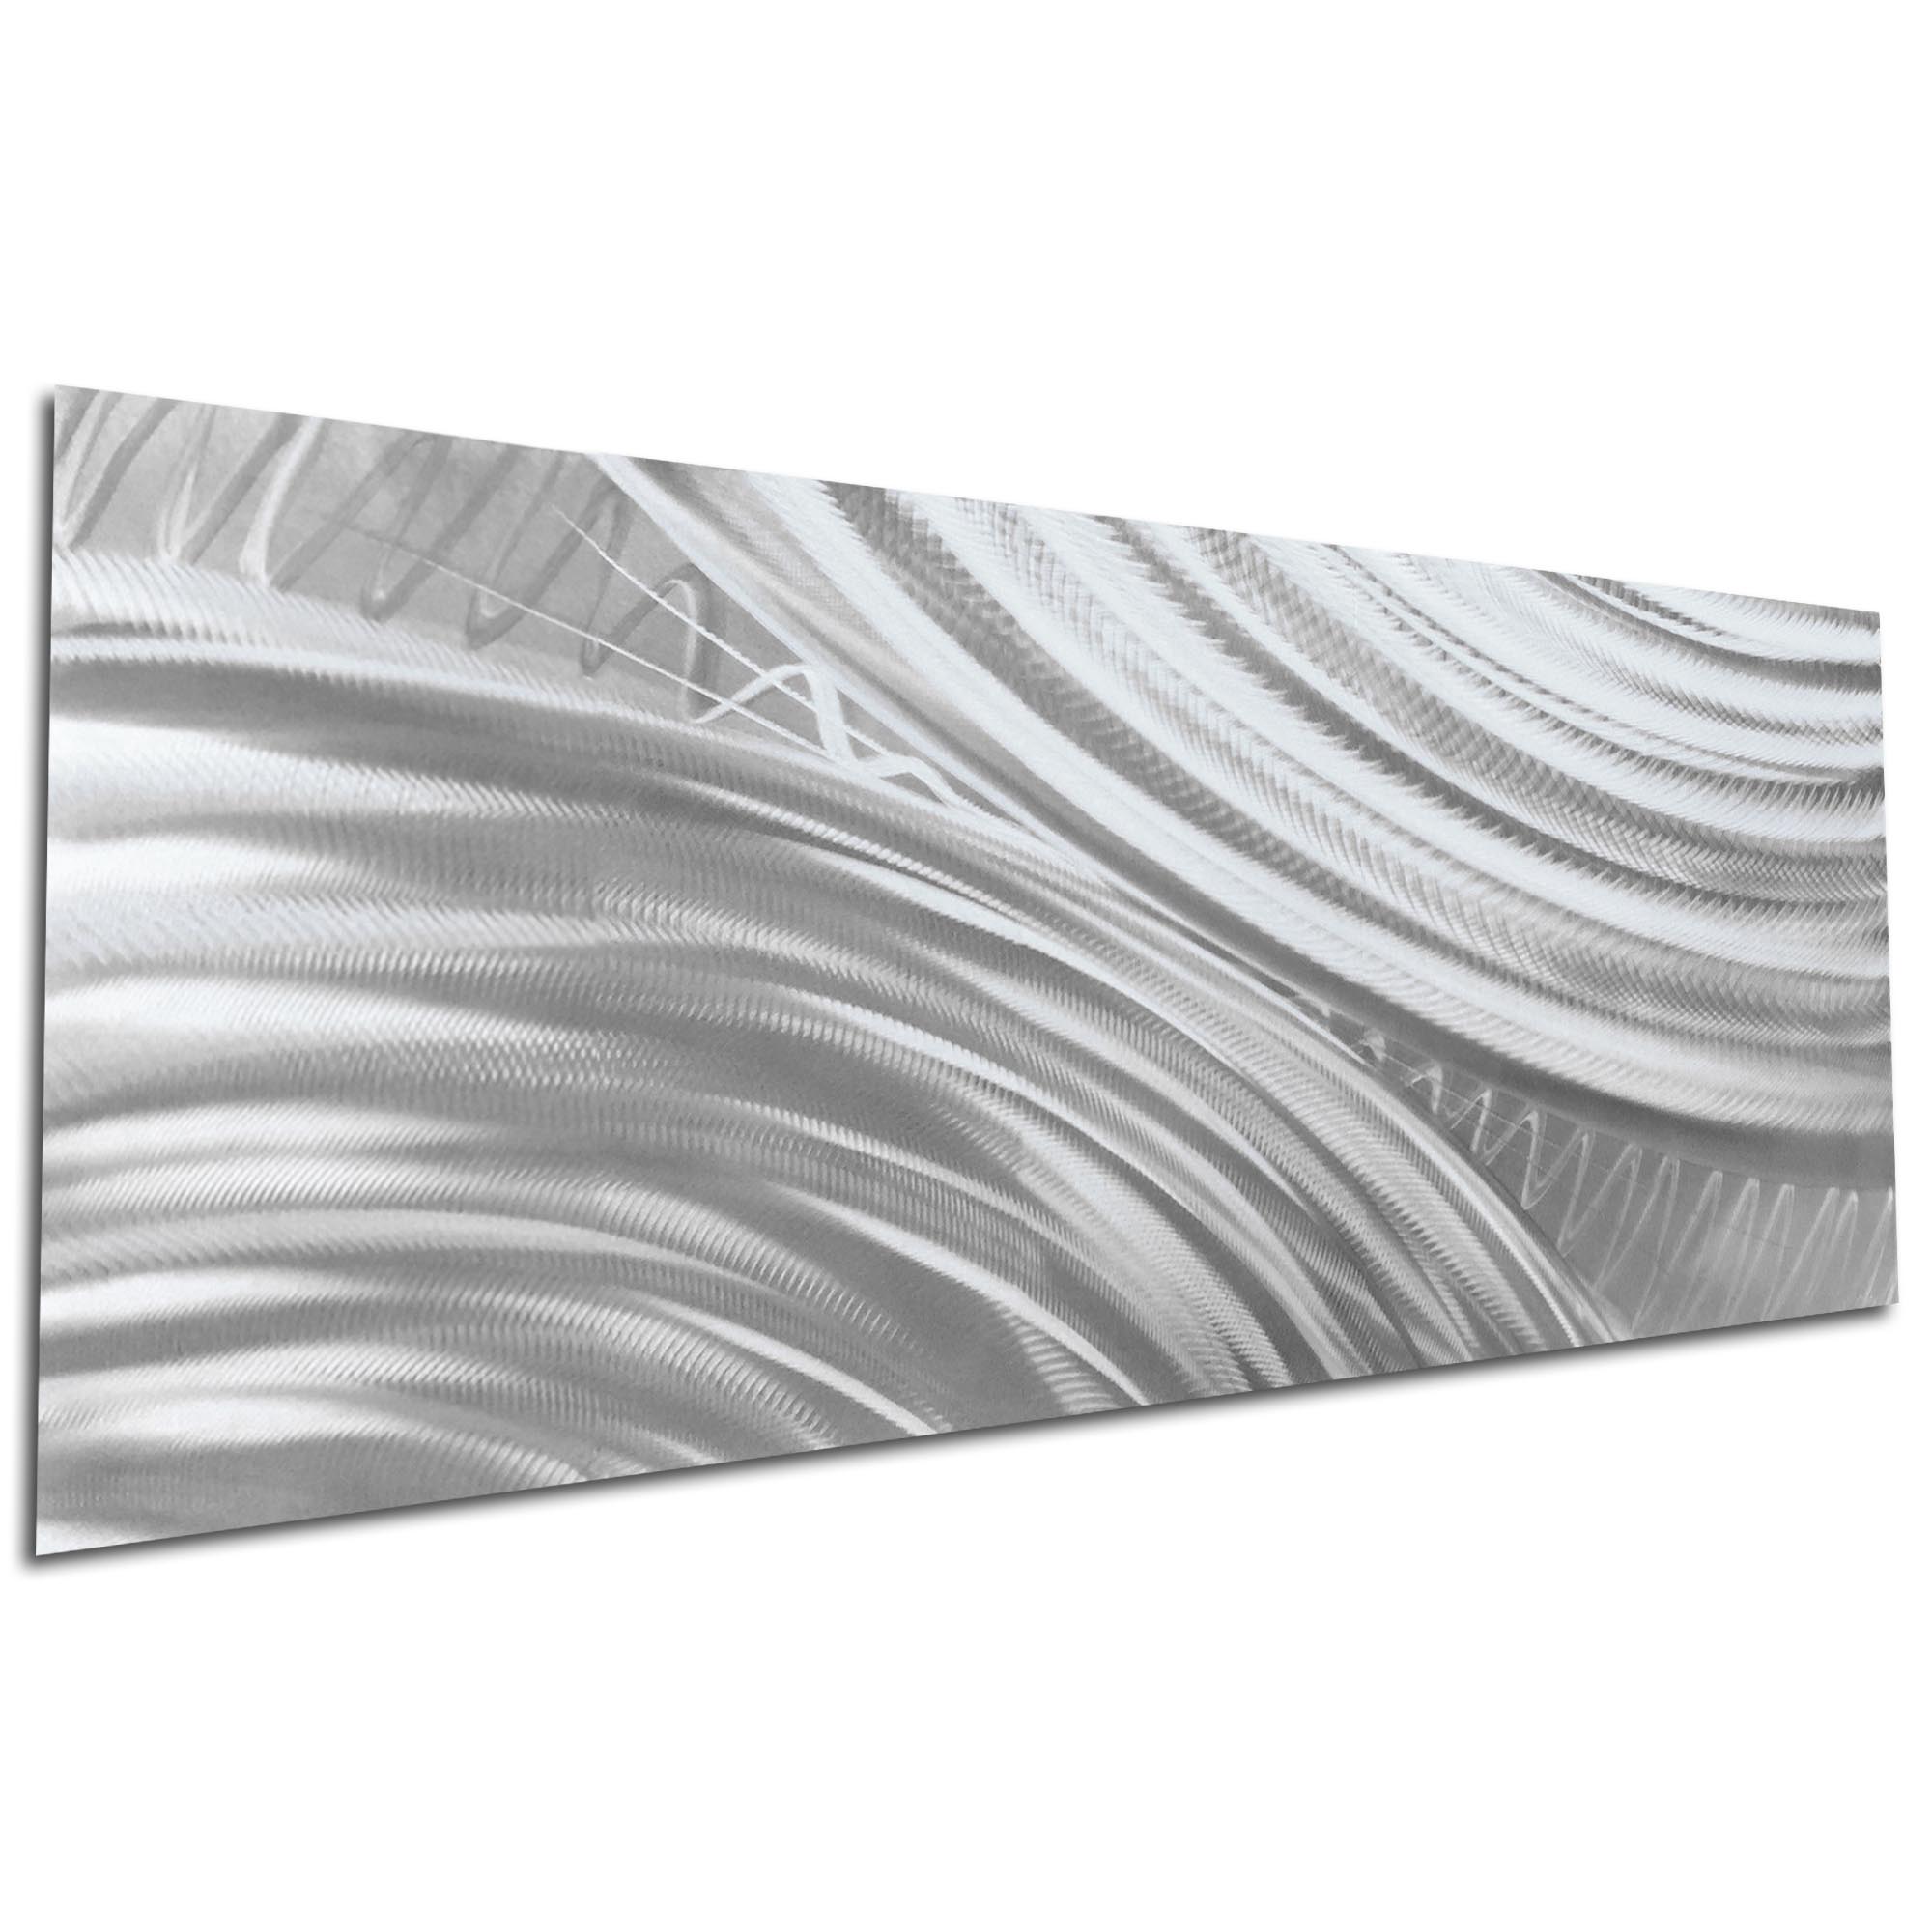 Moment of Impact Silver by Helena Martin - Original Abstract Art on Ground Metal - Image 3